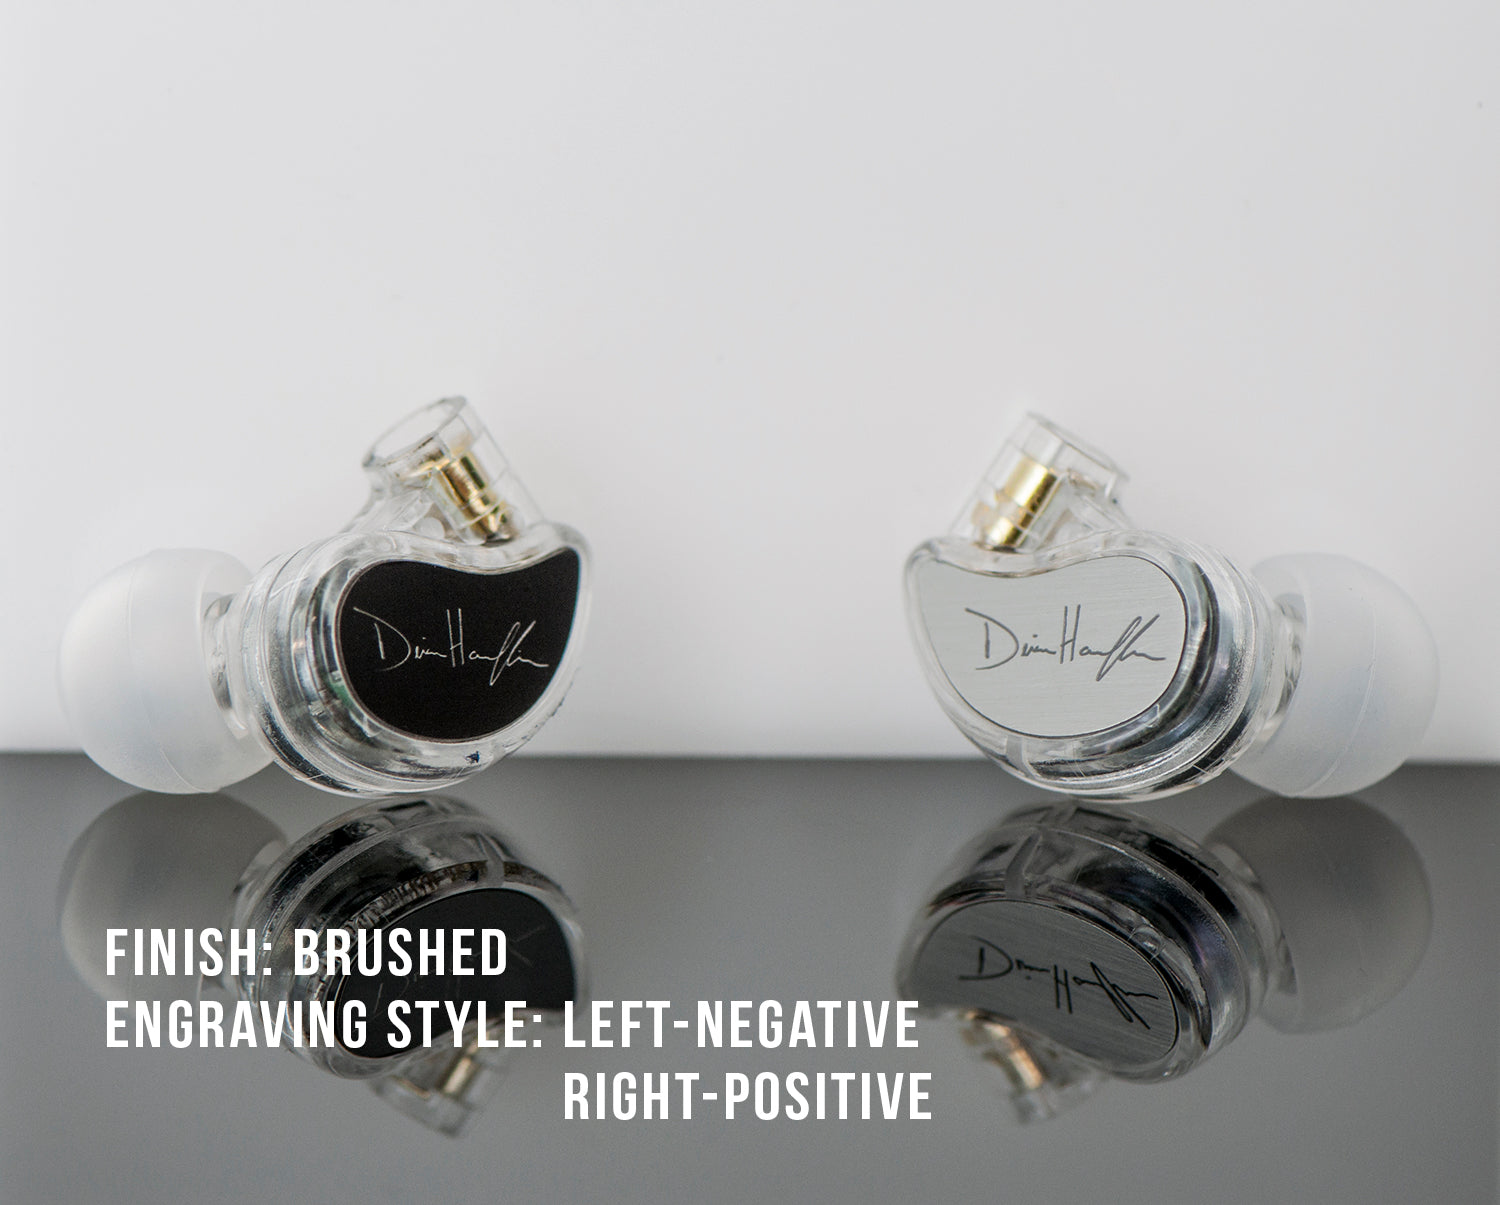 Two customized in-ear monitors on a reflective surface, one with black negative engraving and the other with clear positive engraving, both signed "dihoff".